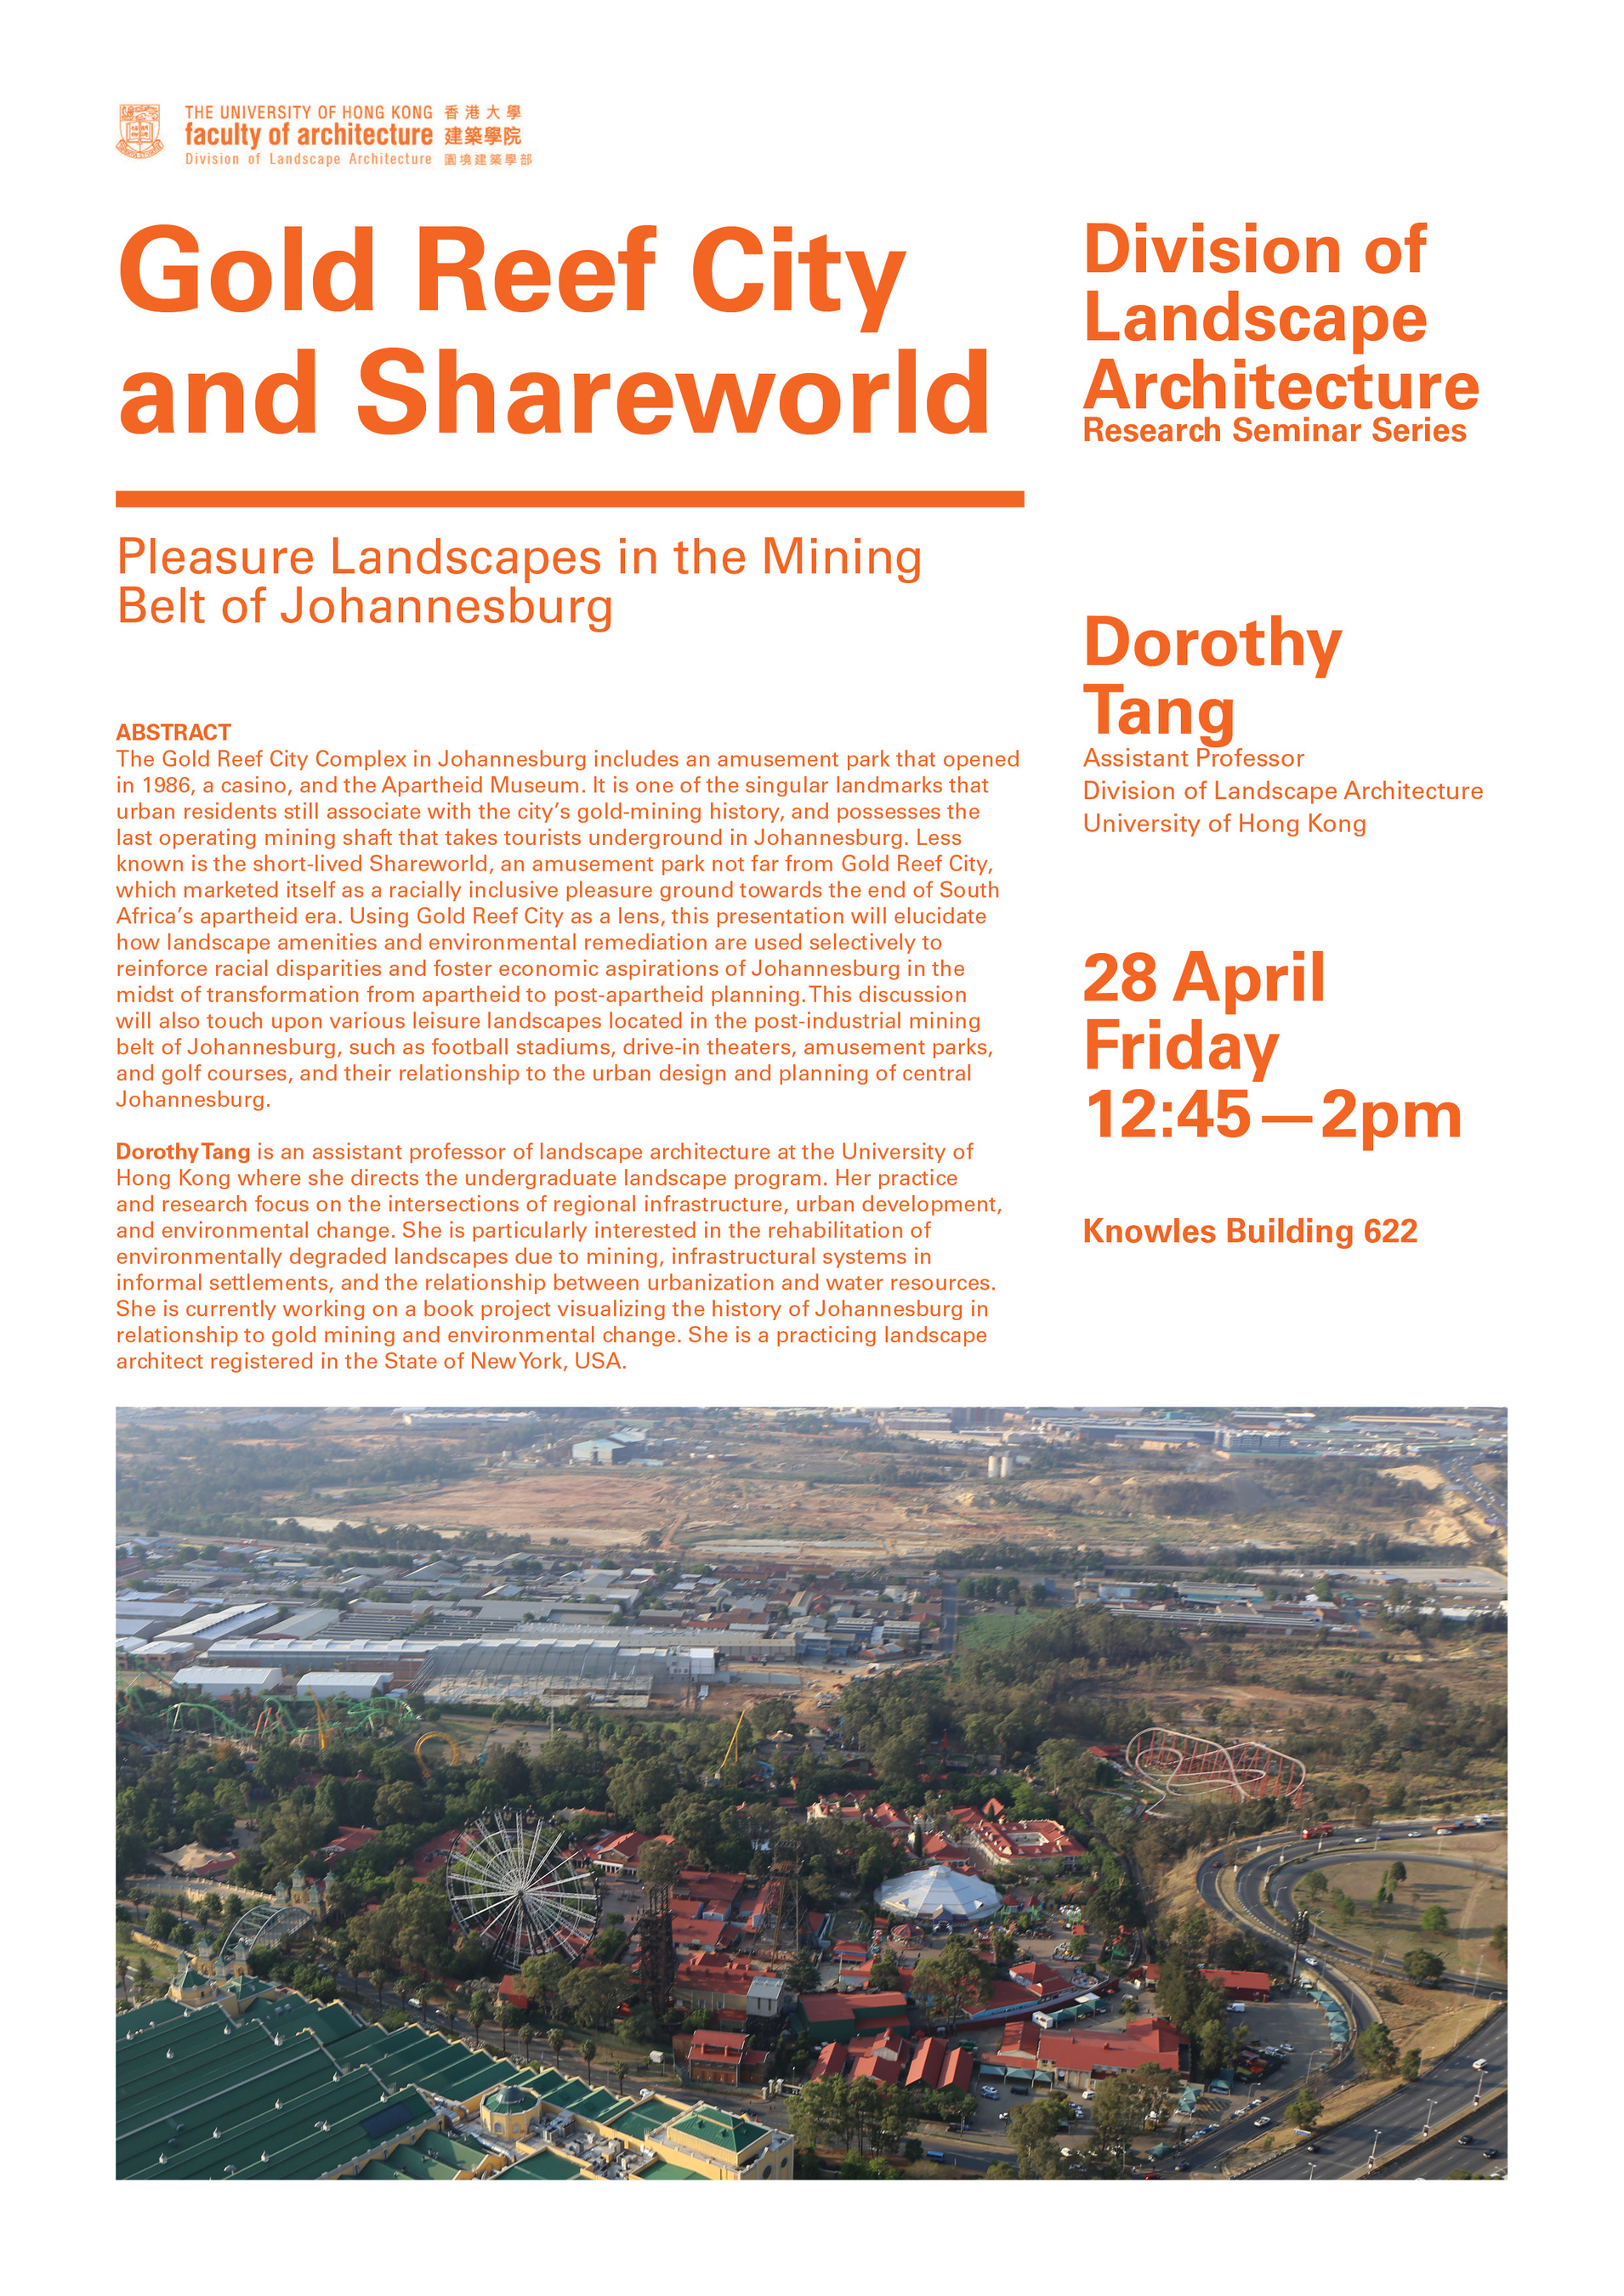 Research Seminar Series - Gold Reef City and Shareworld